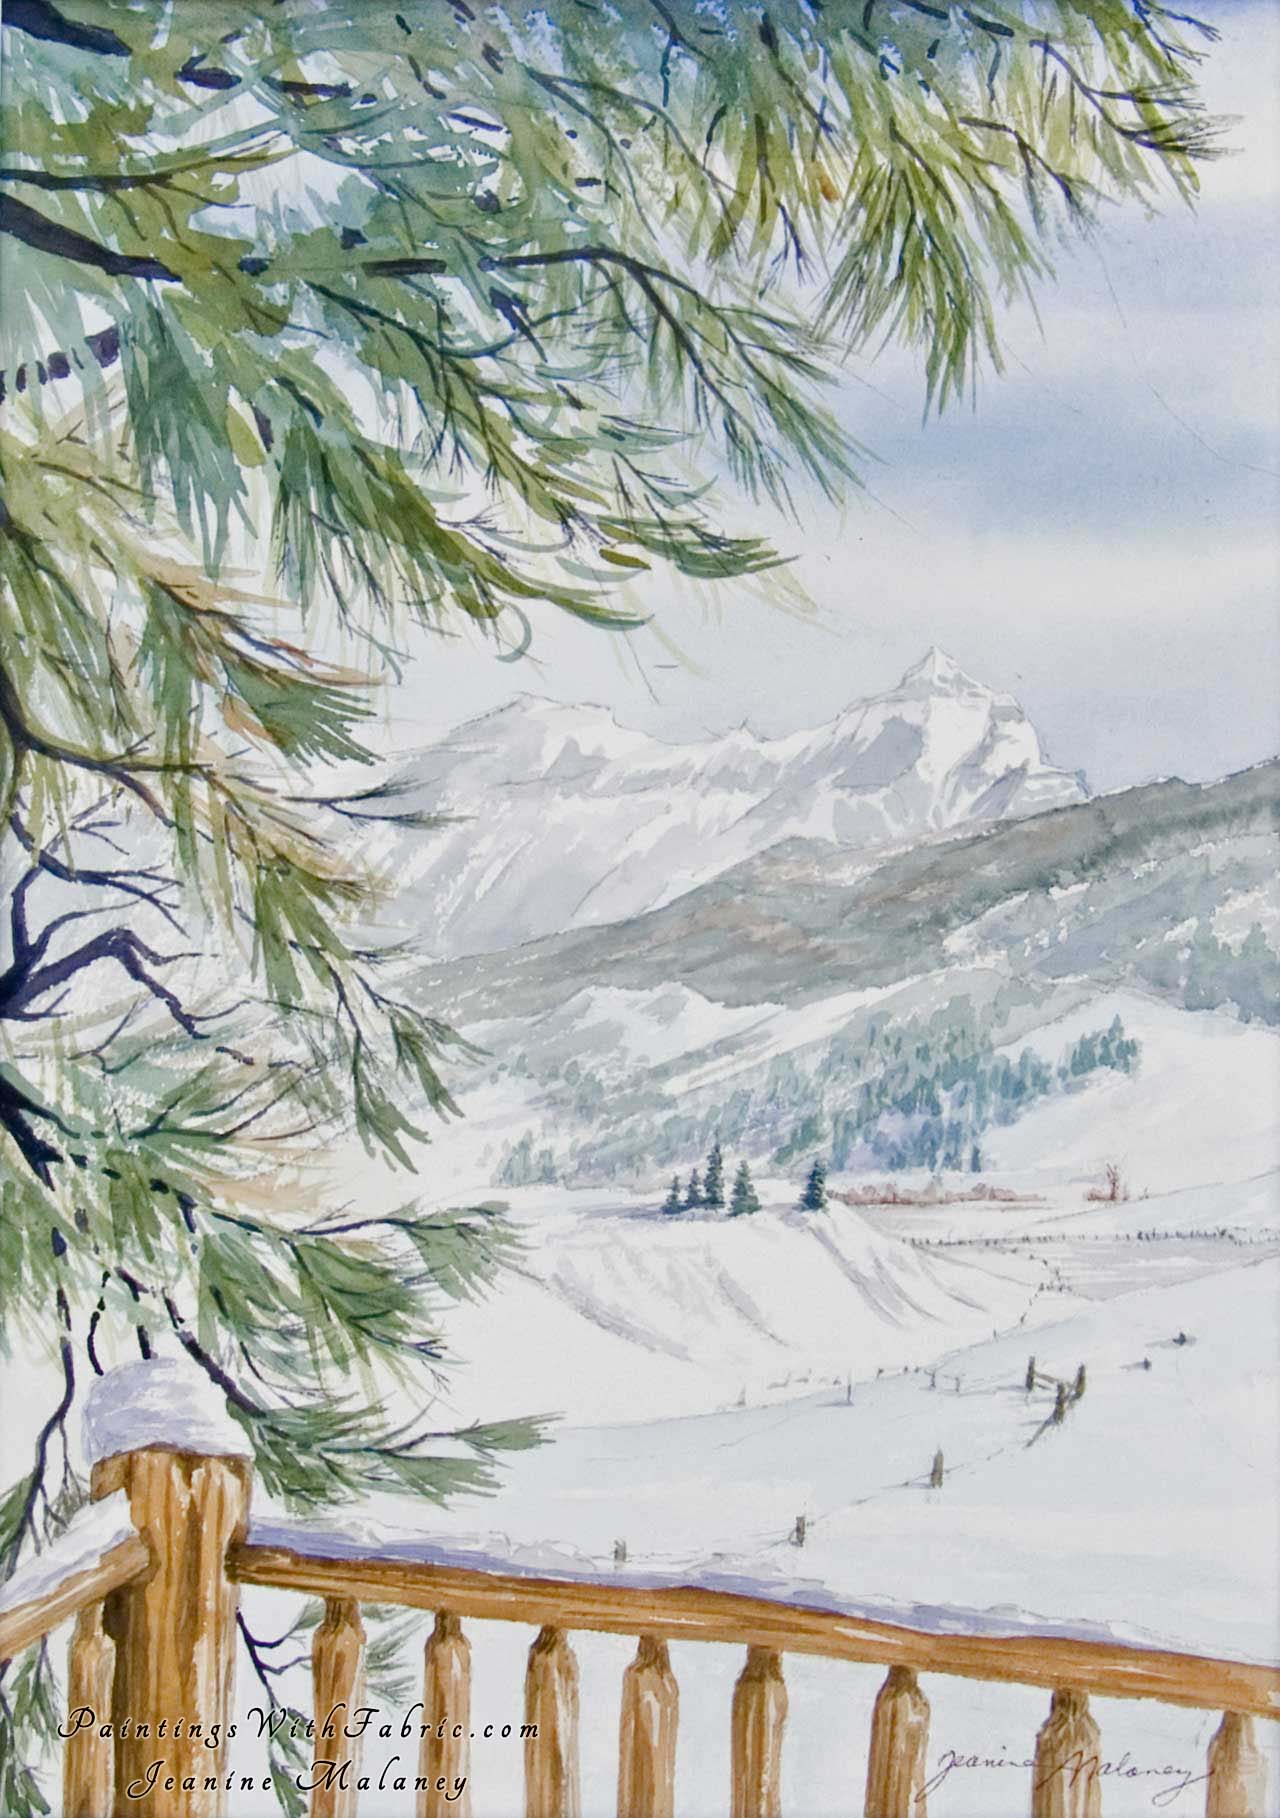 Squaretop Mountain Unframed Original Watercolor Painting of a winter mountain landscape